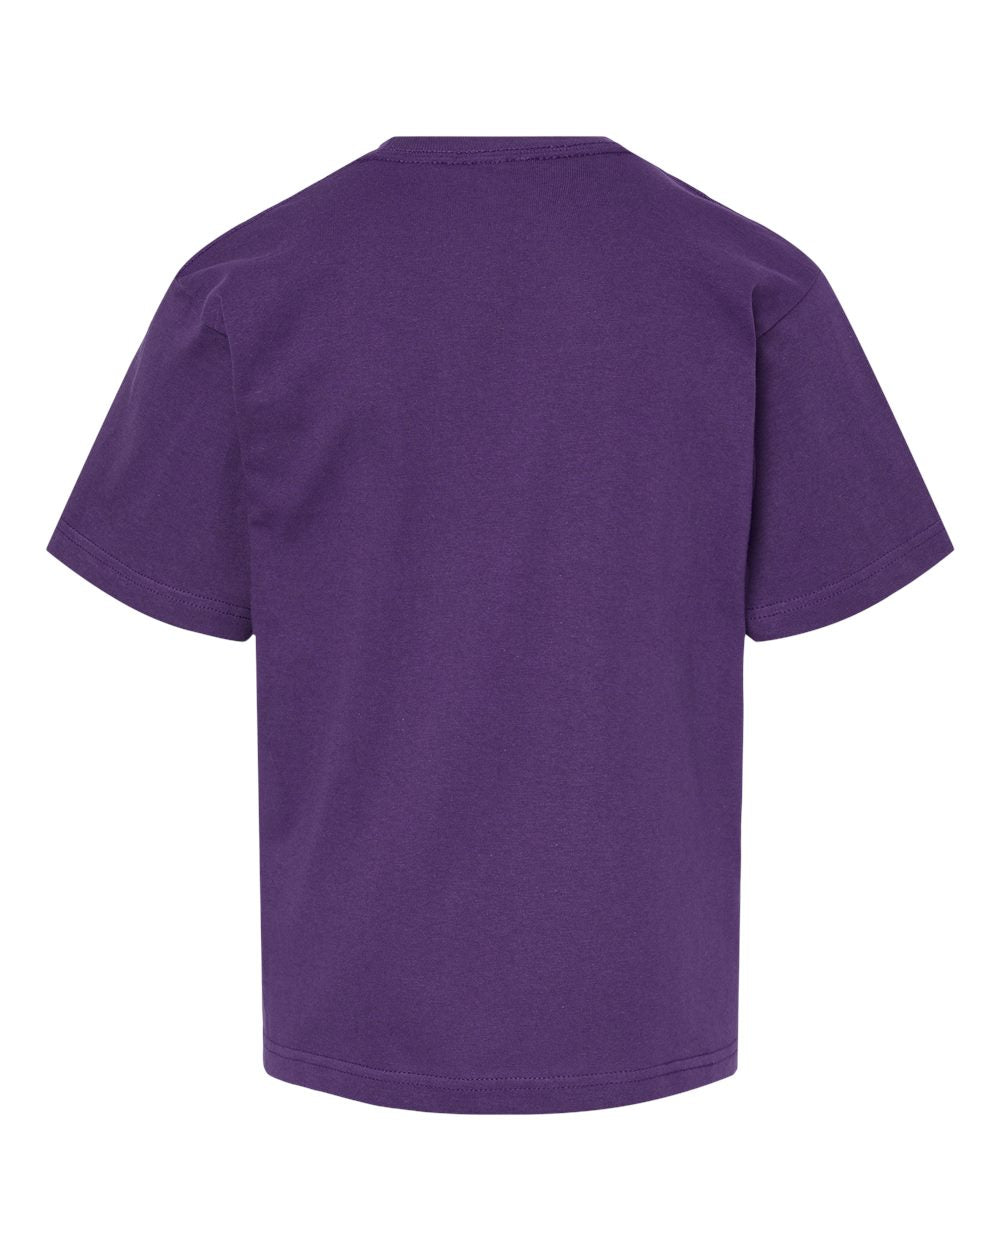 M&O Youth Gold Soft Touch T-Shirt 4850 #color_Purple